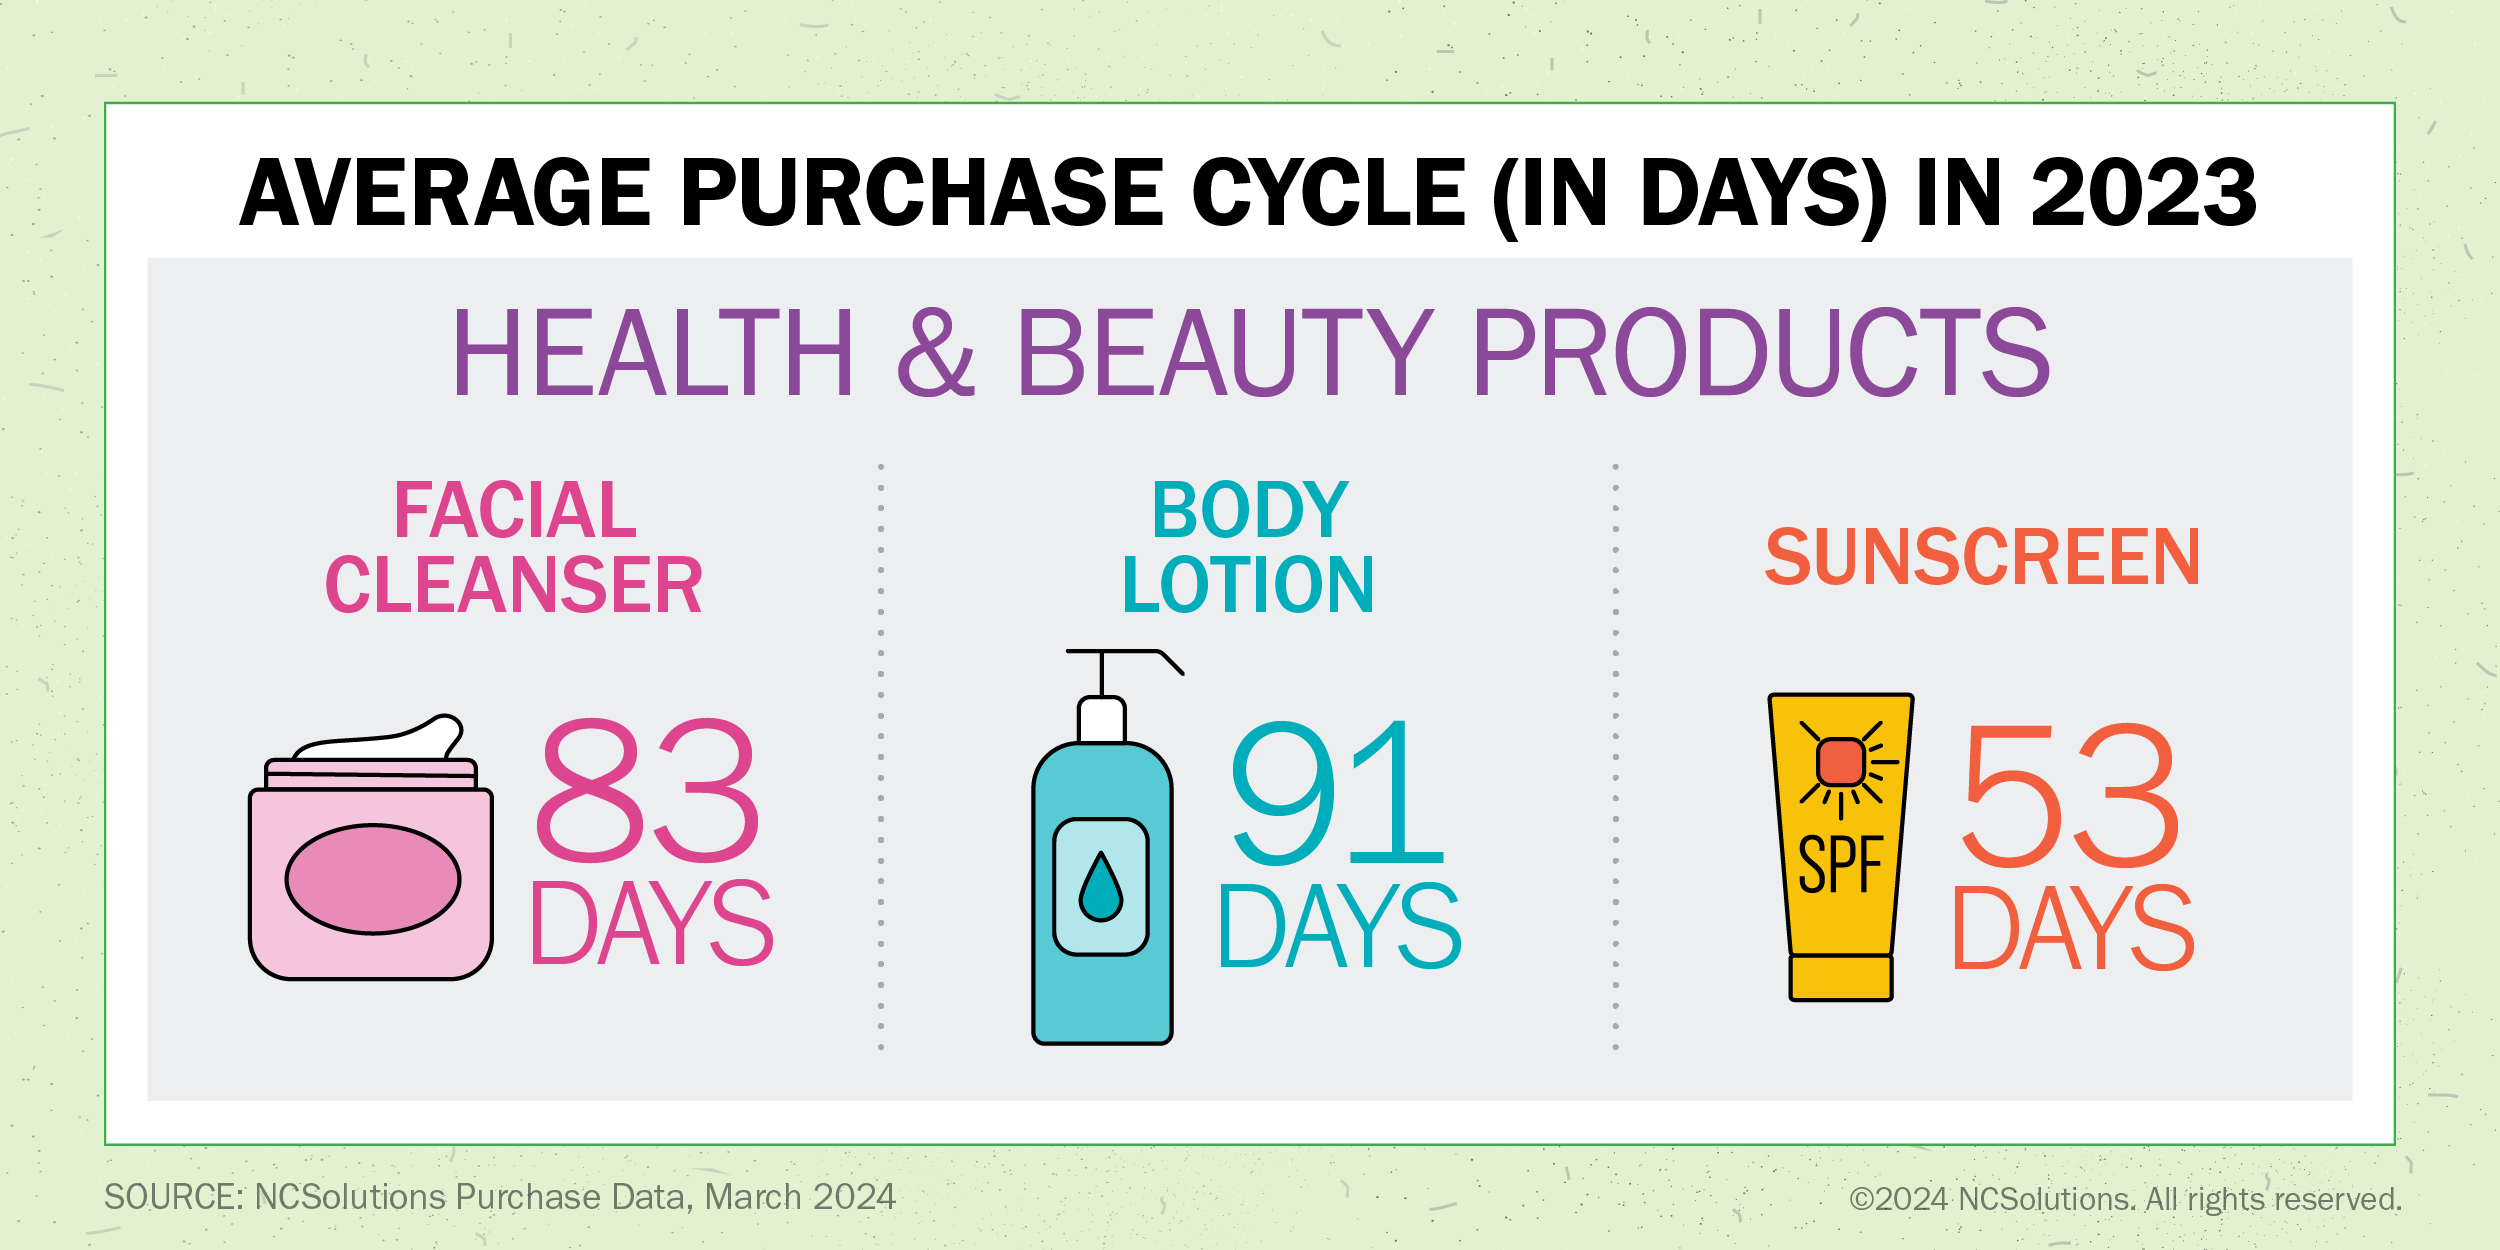 The average purchase cycle for facial cleanser is 83 days, body lotion is 91 days, and sunscreen is 53 days 